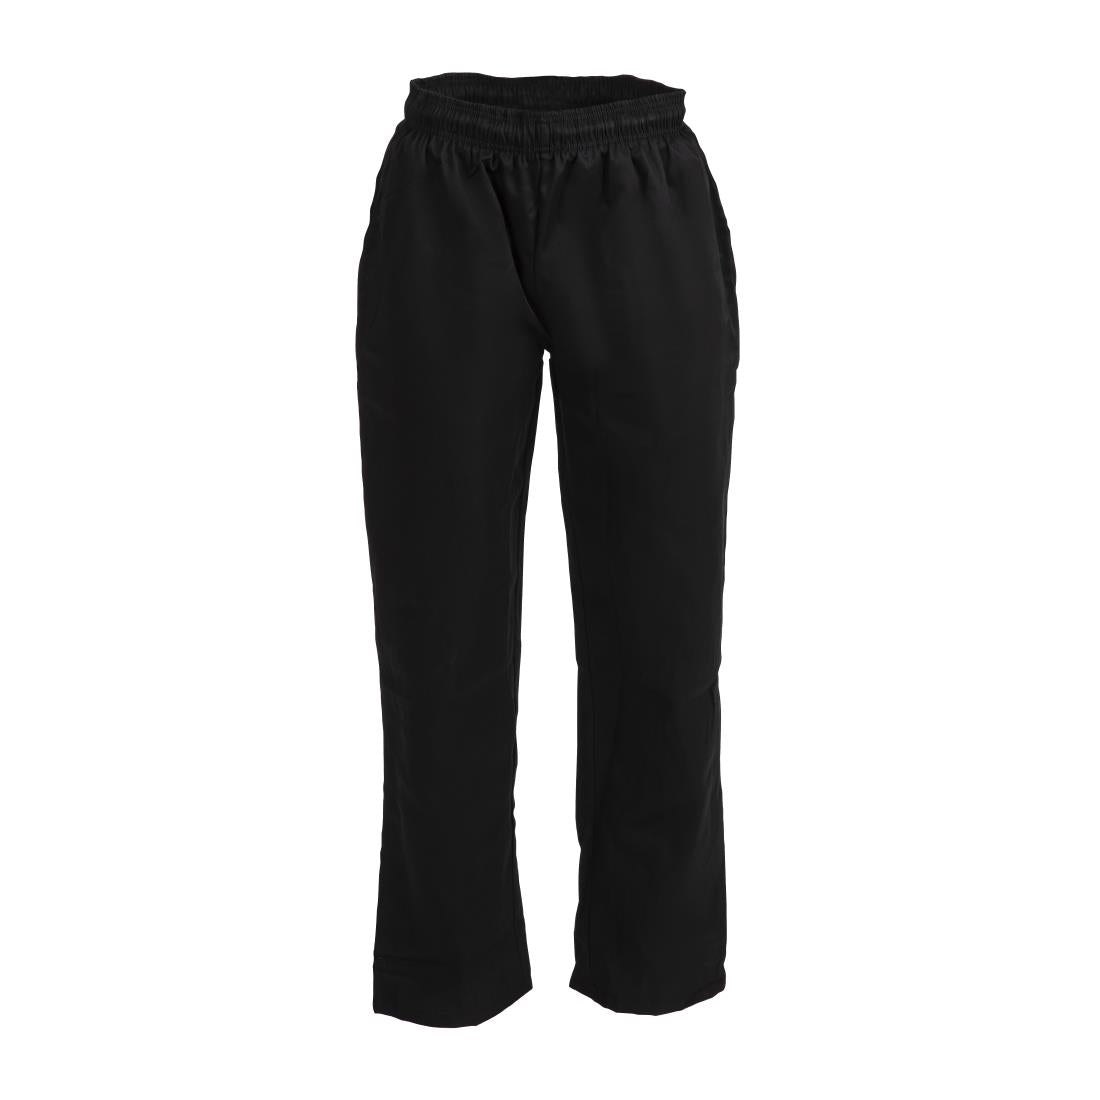 A582-XS Whites Vegas Chef Trousers Polycotton Black XS JD Catering Equipment Solutions Ltd